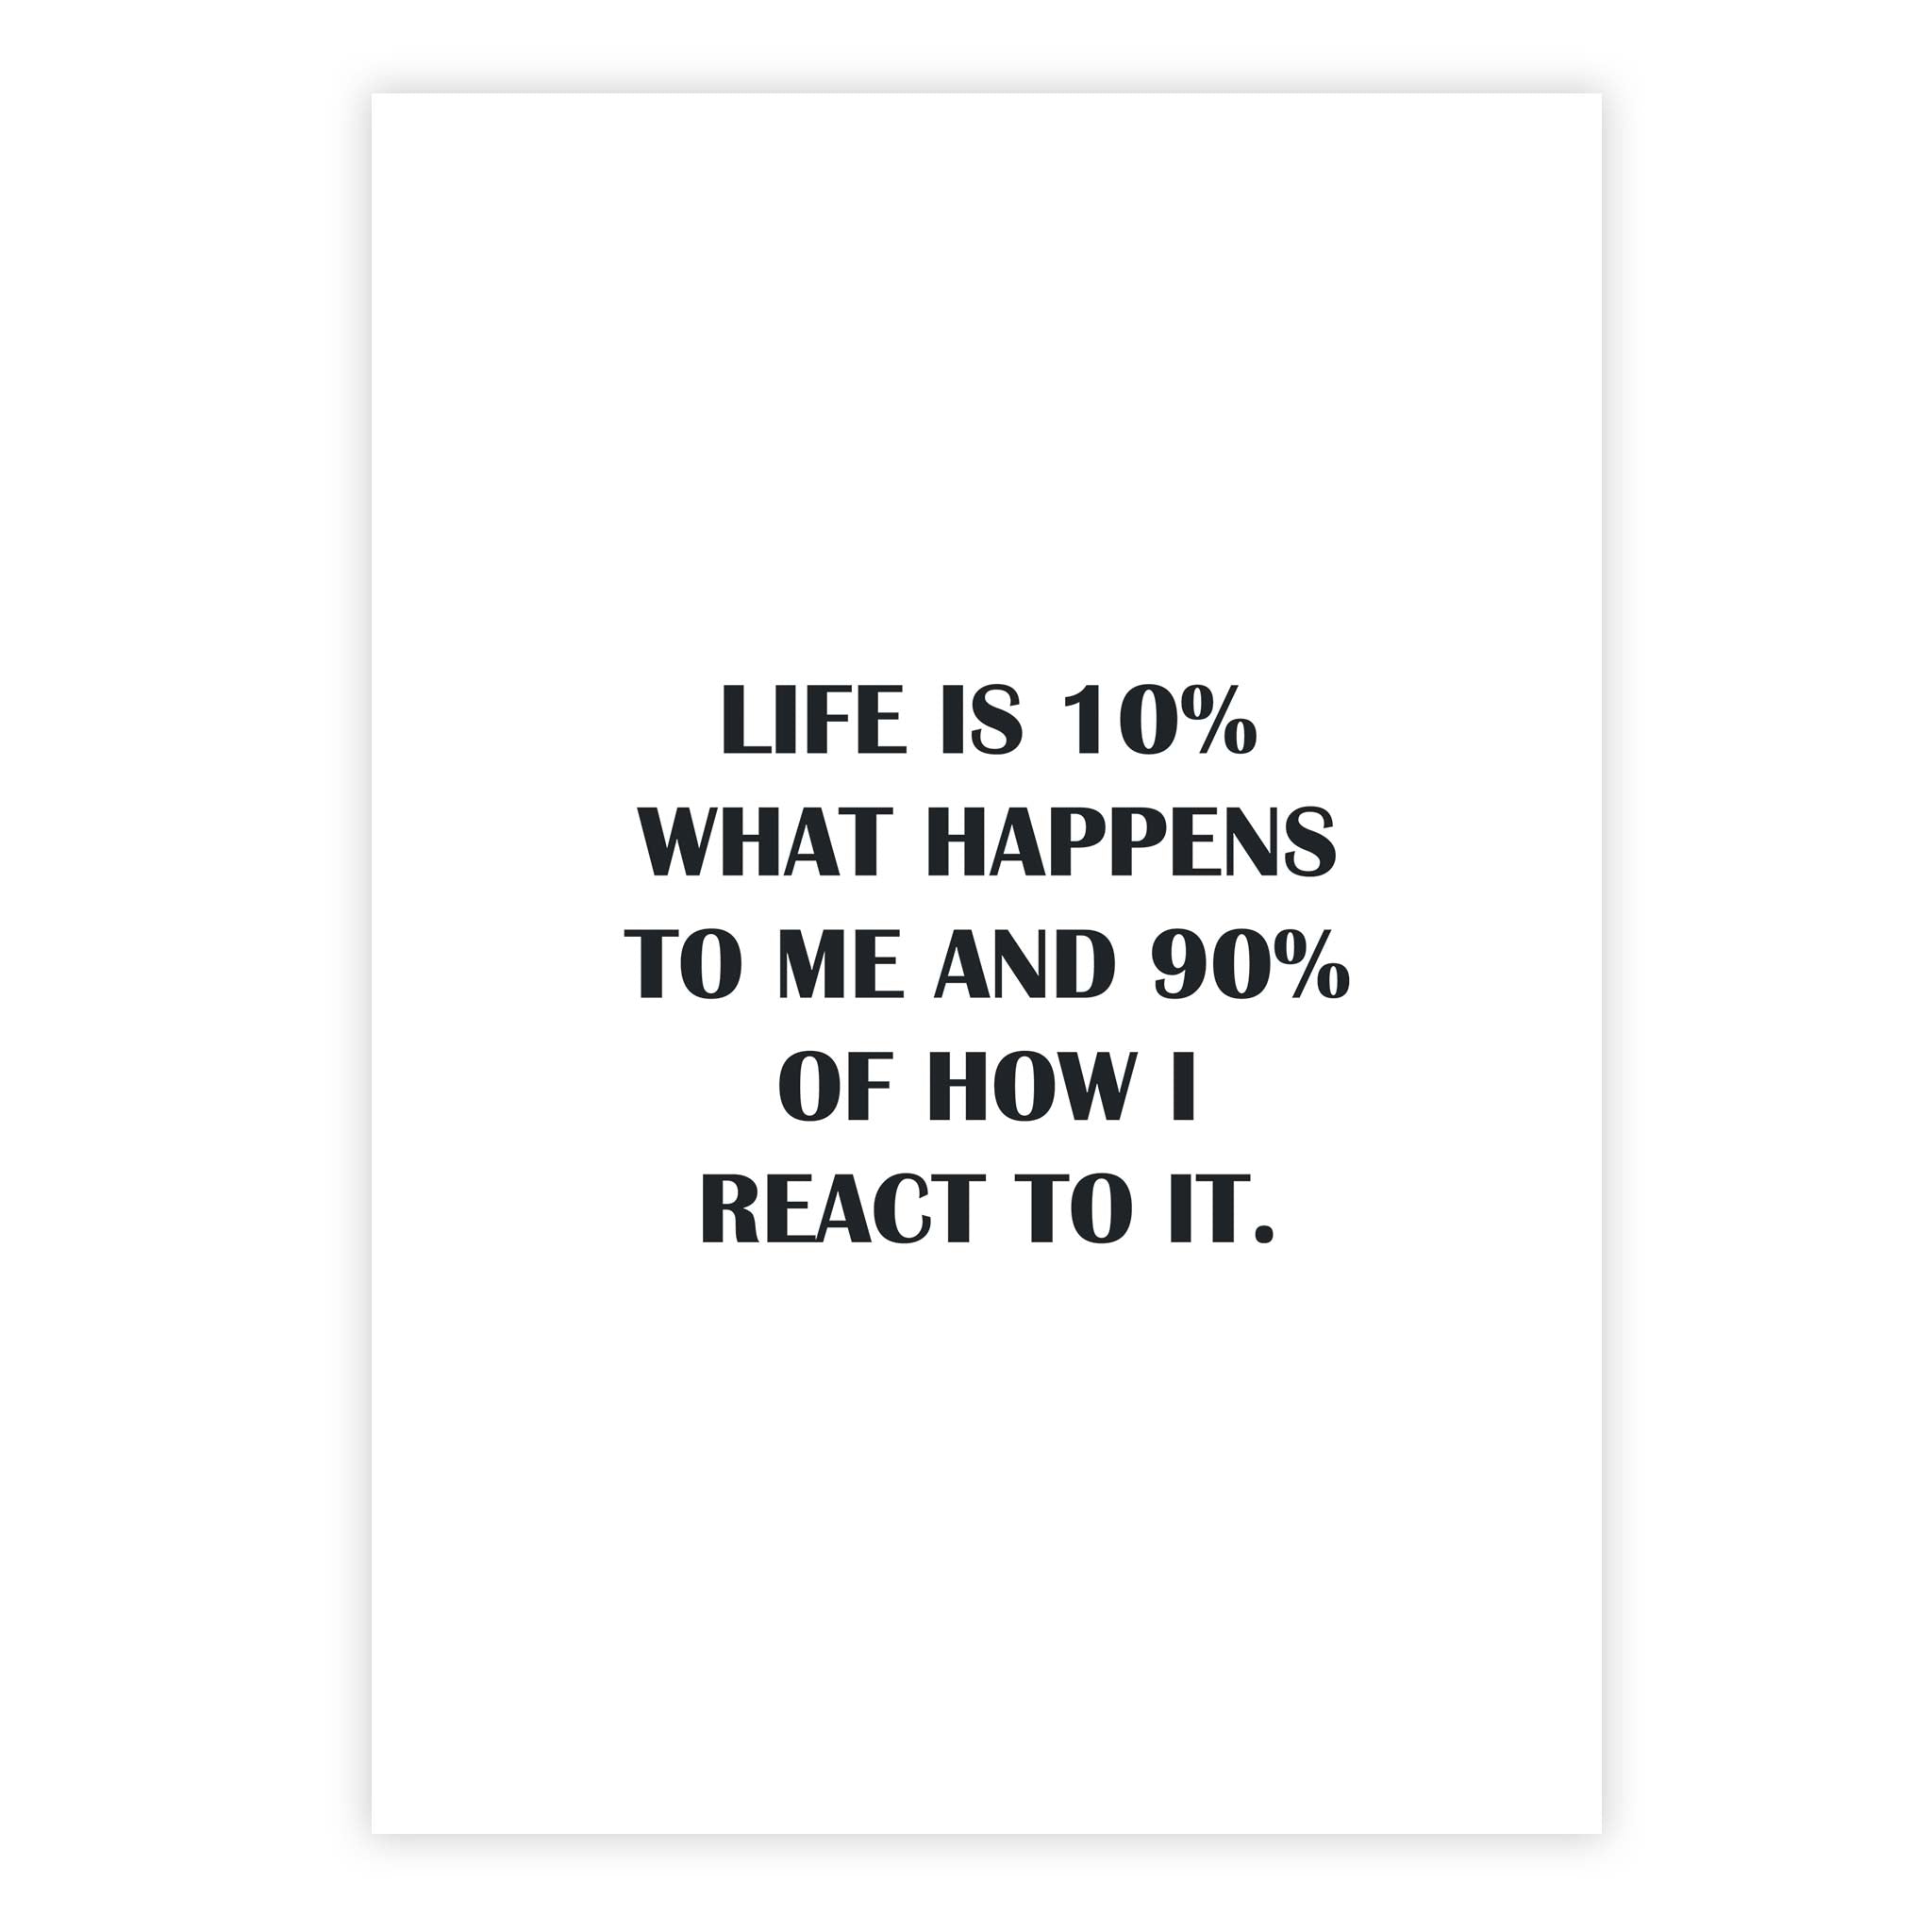 Life is 10% what happens to me and 90% of how I react to it